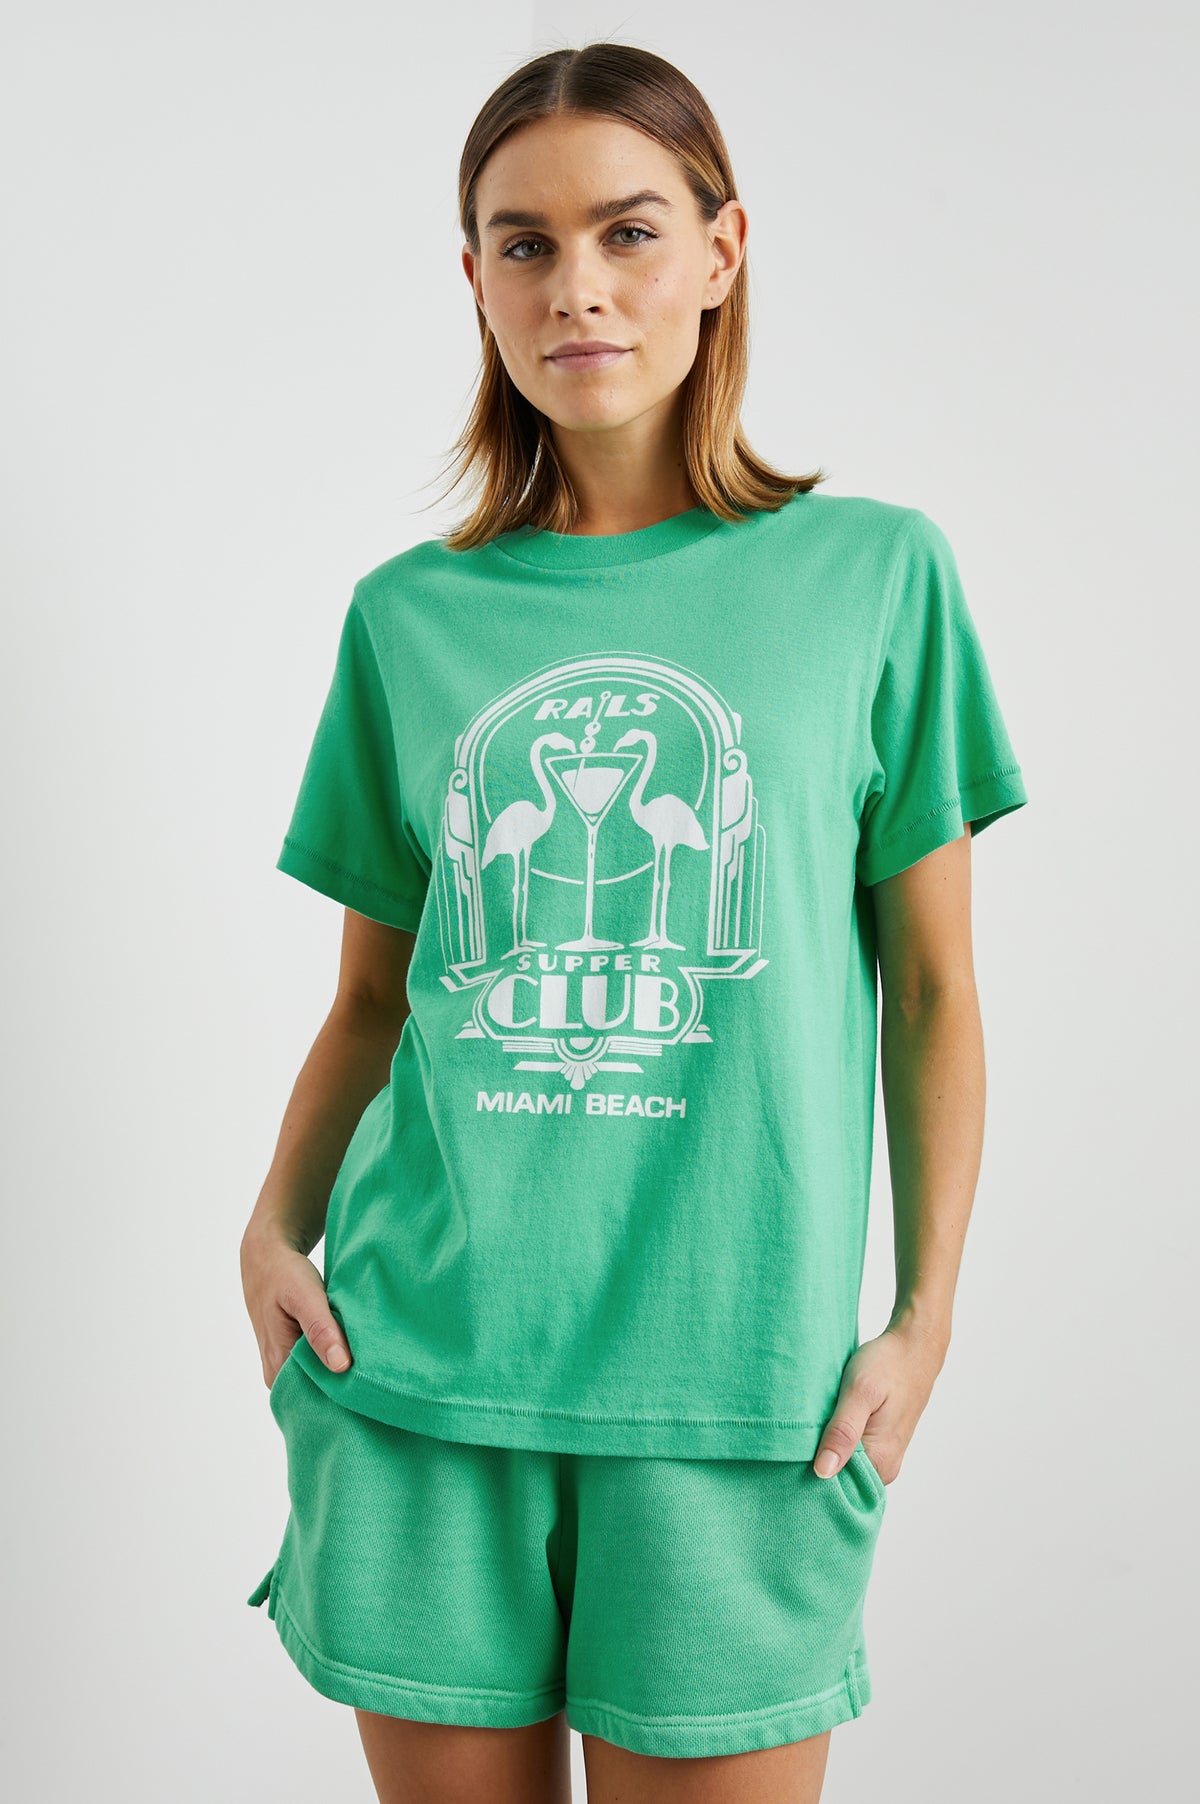 Boyfriend fit green tee with Flamingo design decal and short sleeves